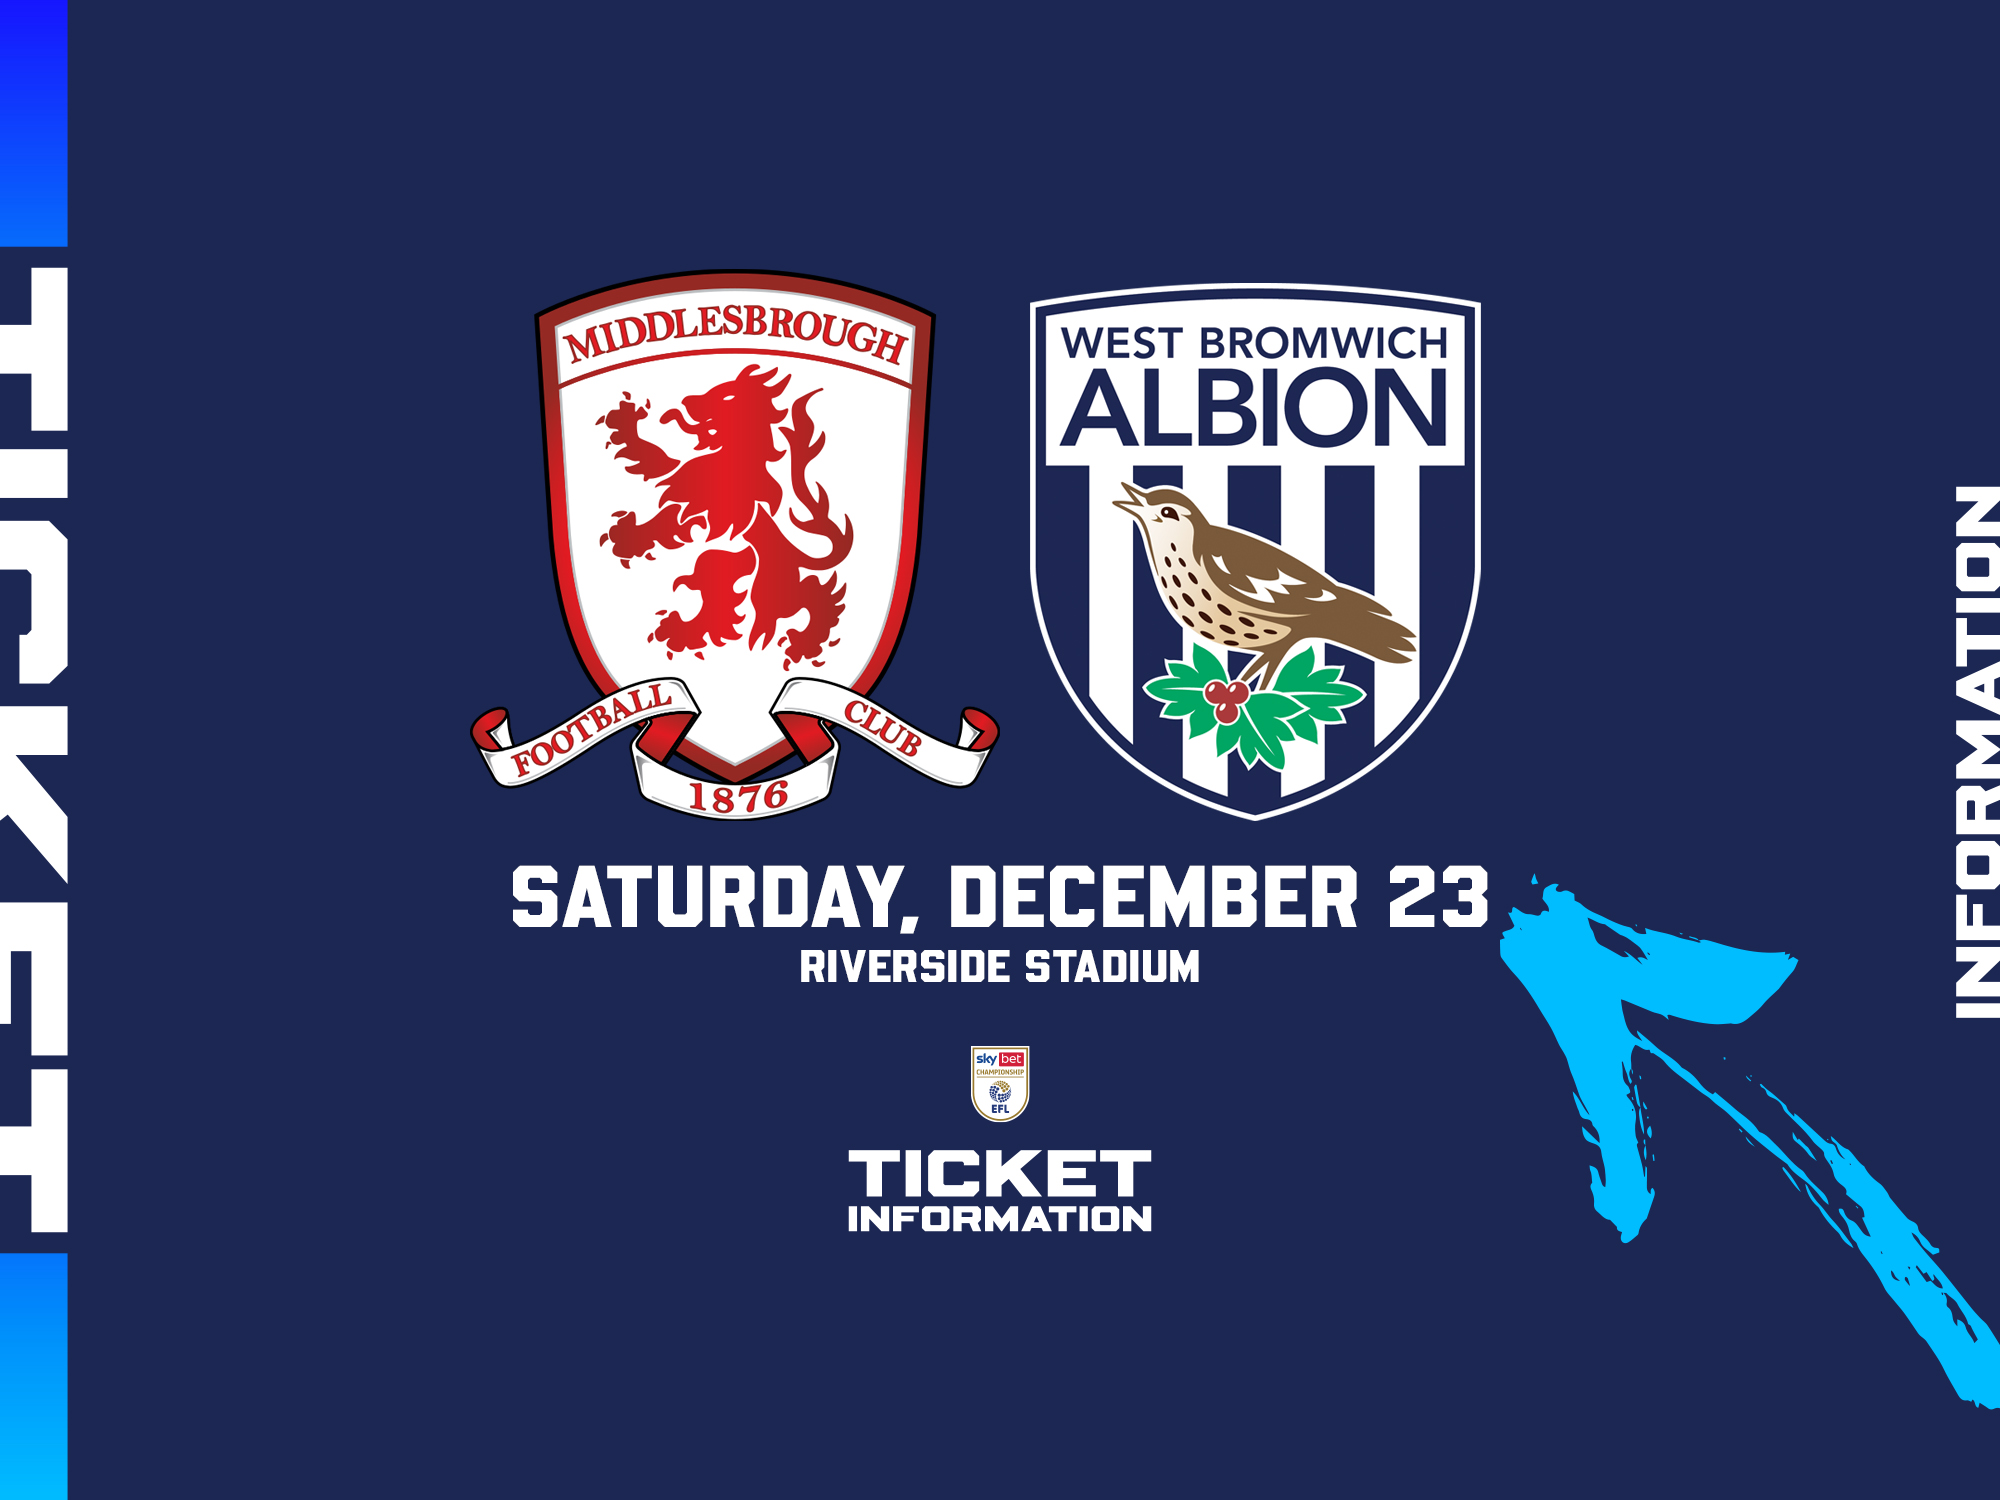 A ticket graphic displaying information for Albion's game against Middlesbrough